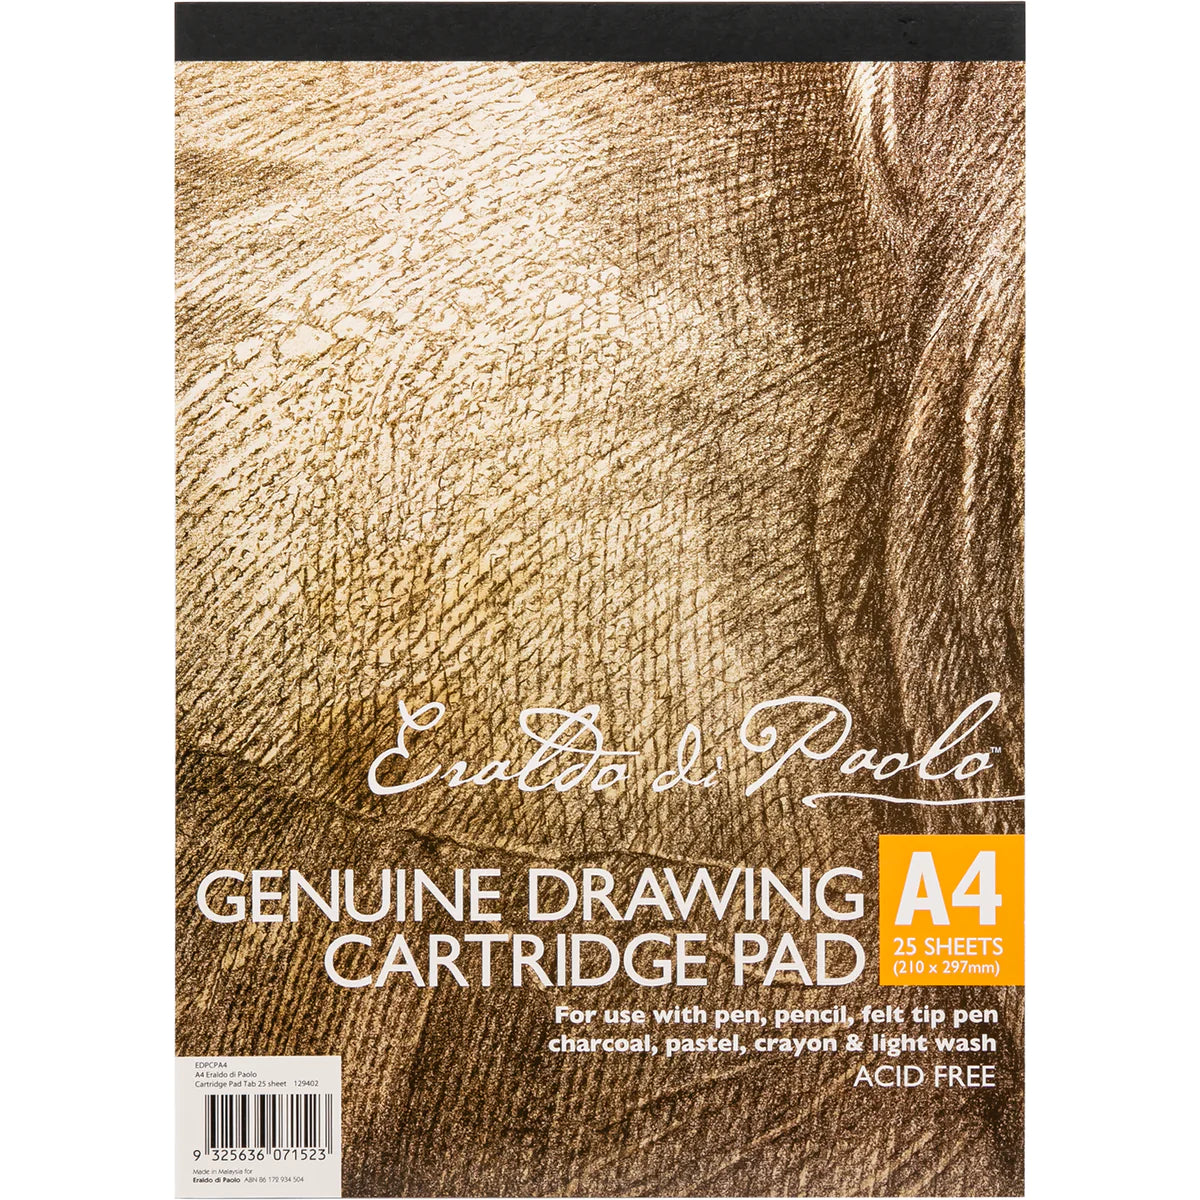 A4 Genuine Drawing Cartridge Pad 110gsm 25 Sheets